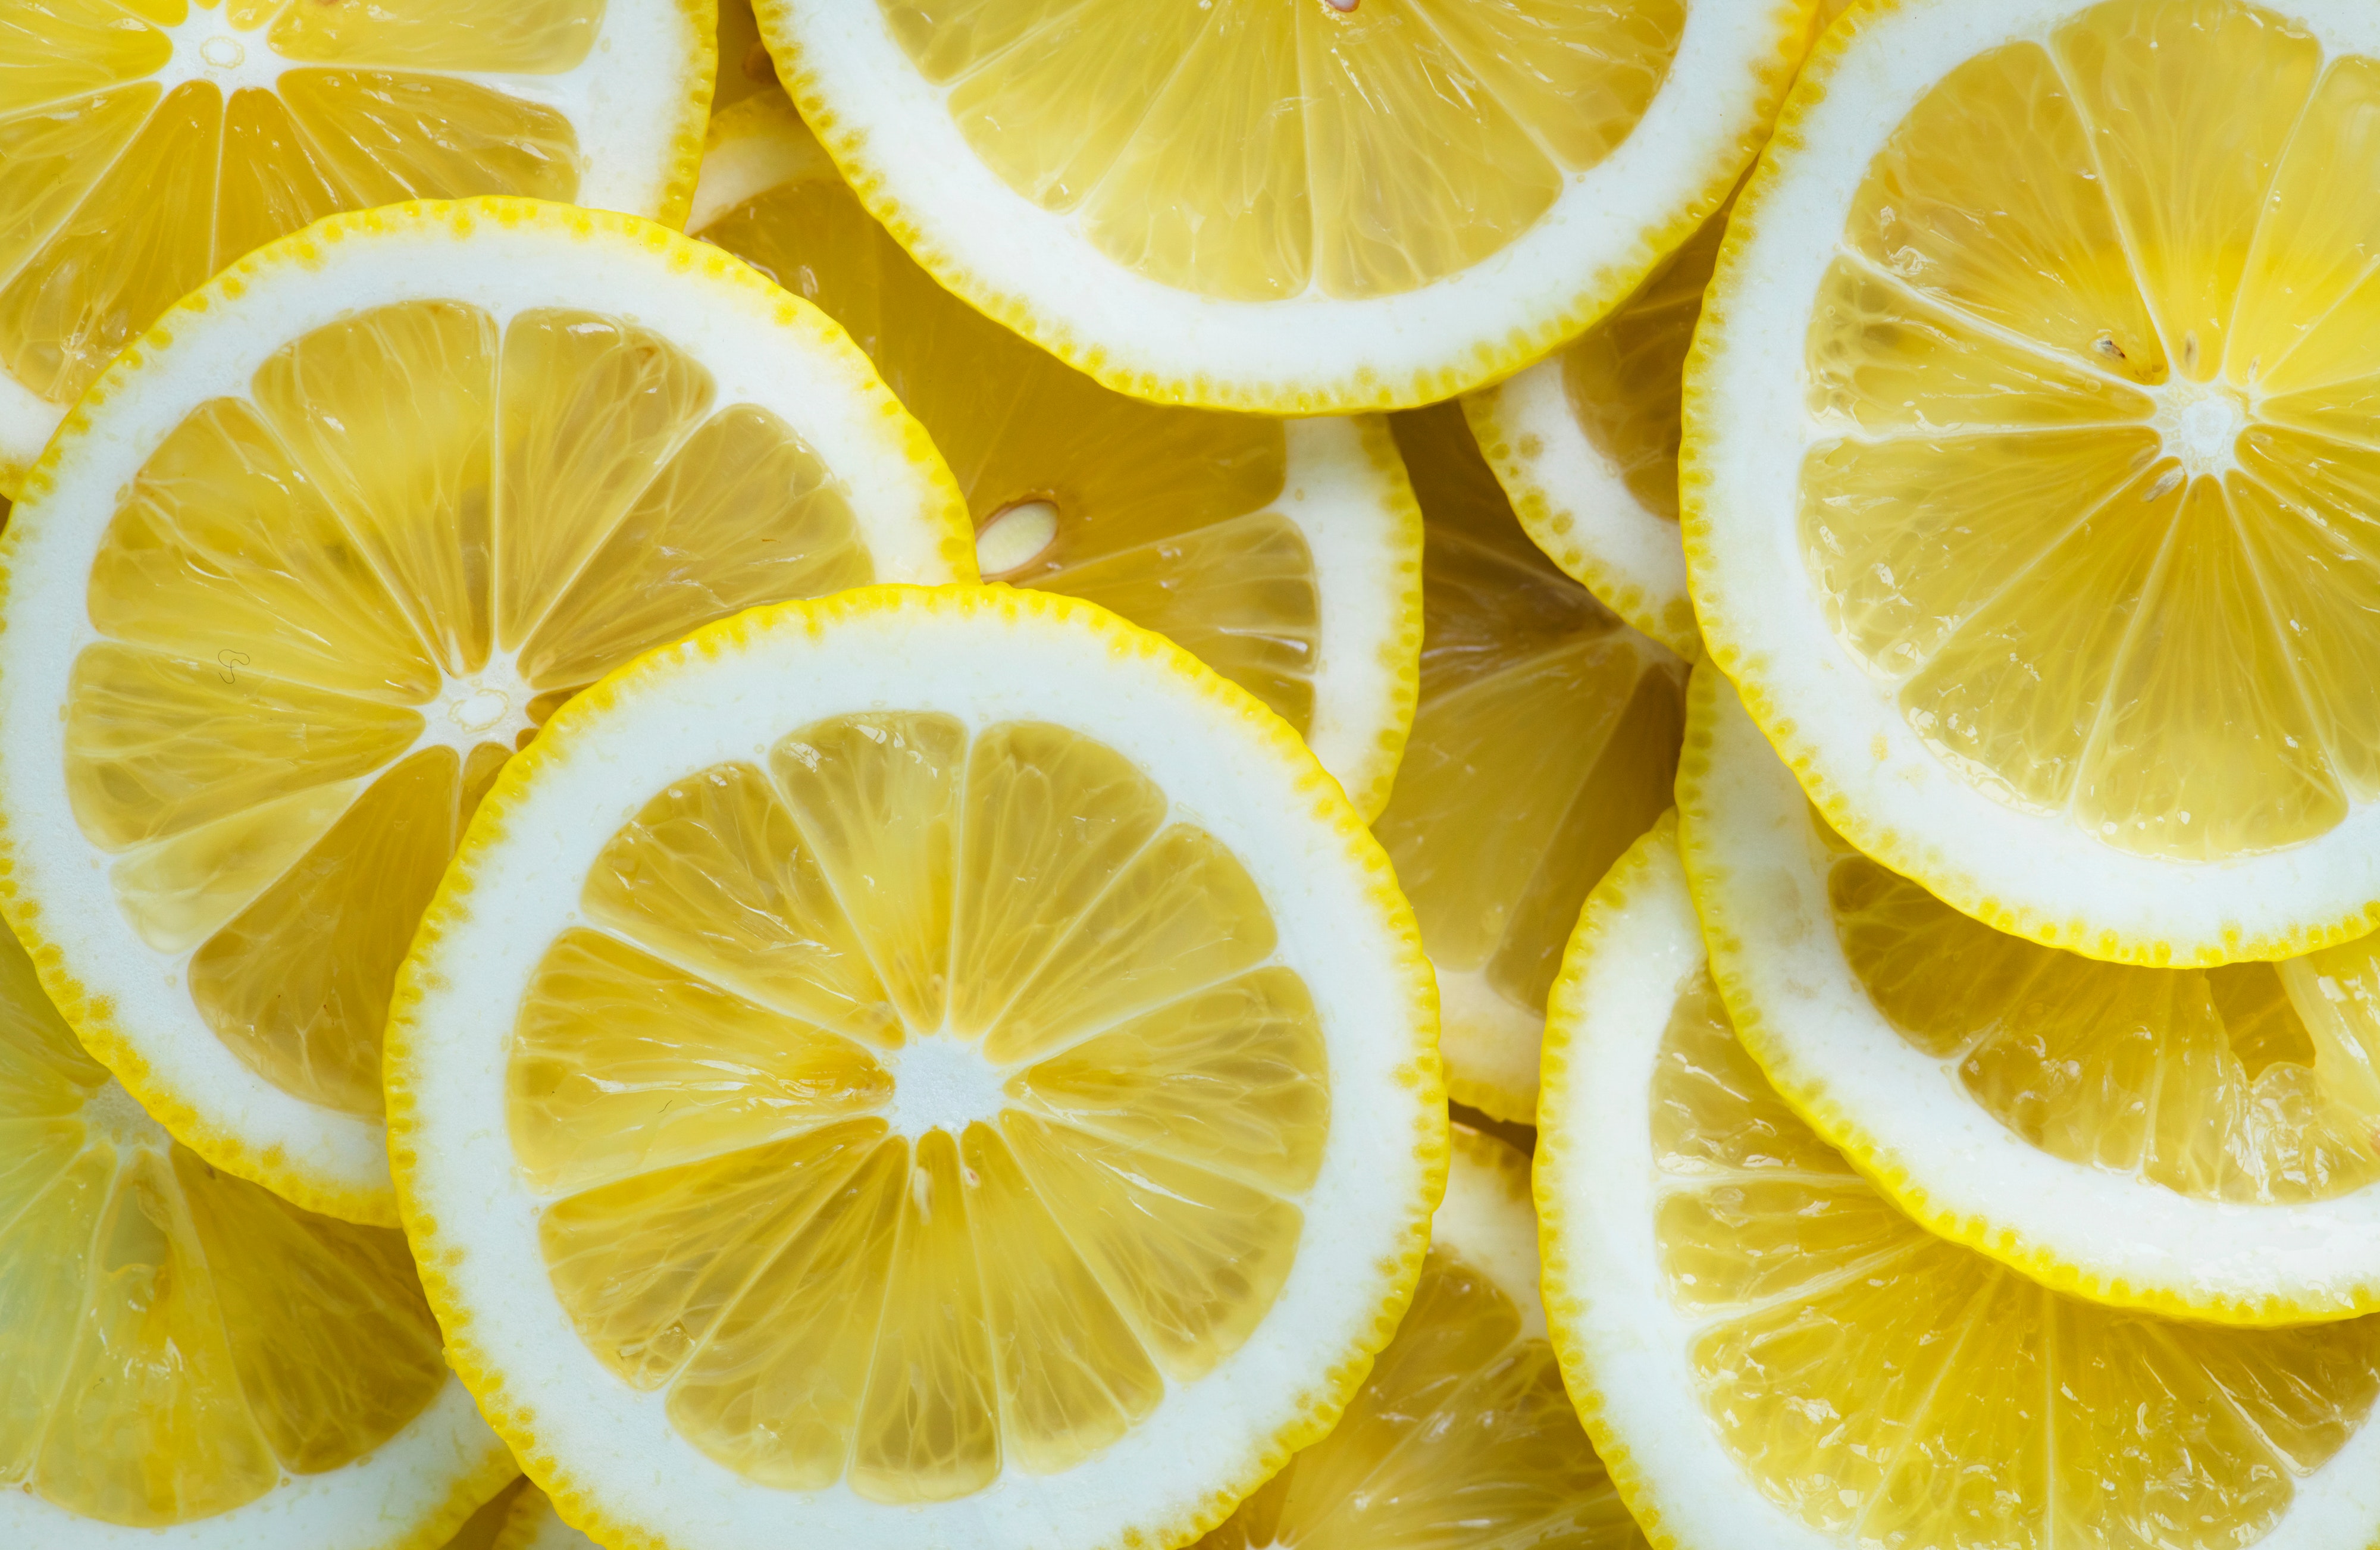 Best All-Natural Cleaning Tips #3: Freshen up your garbage disposal with lemons. 